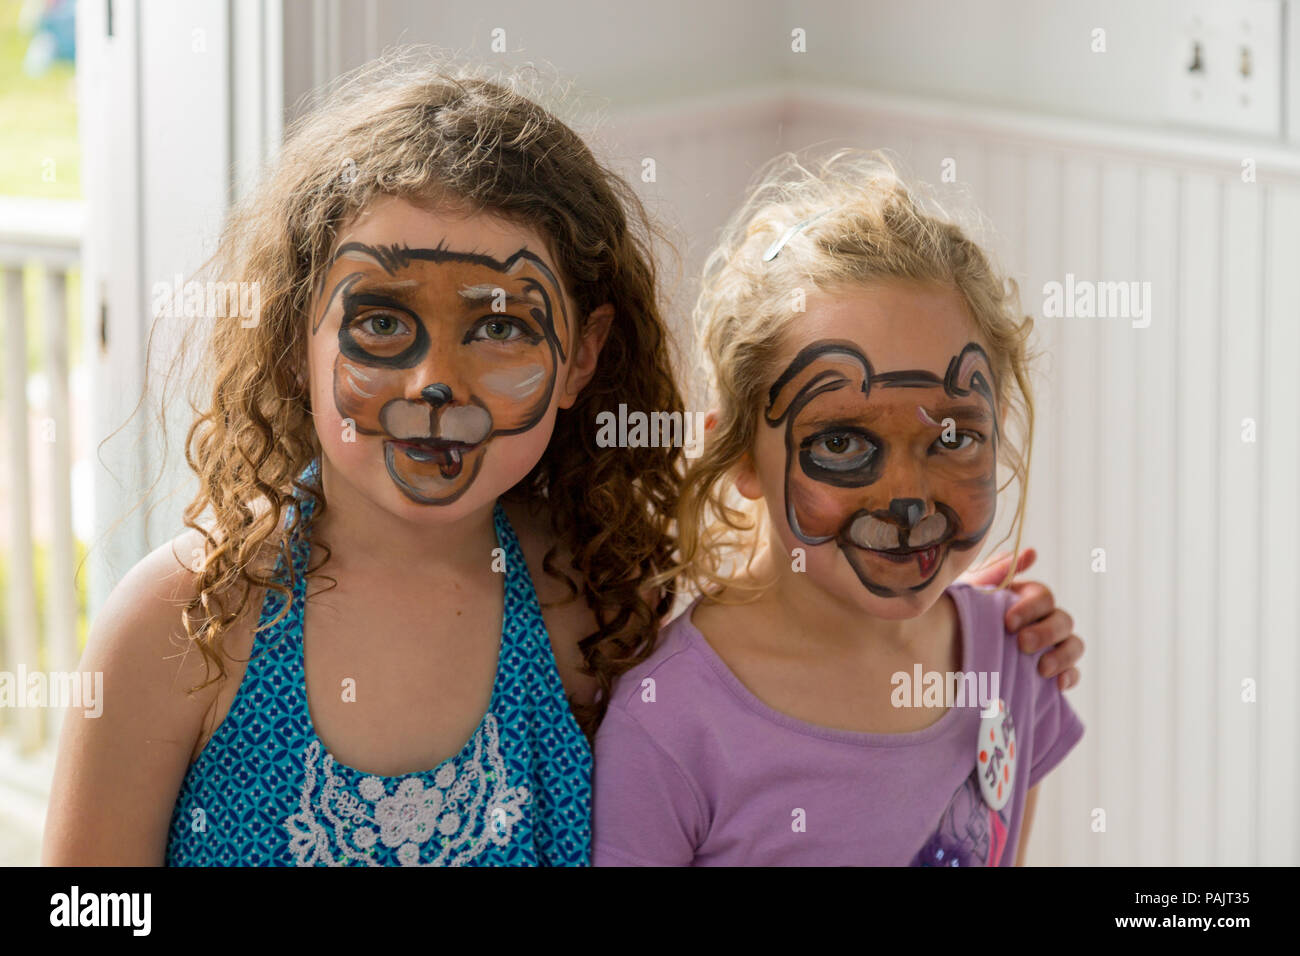 two young girls with face paint on their faces Stock Photo